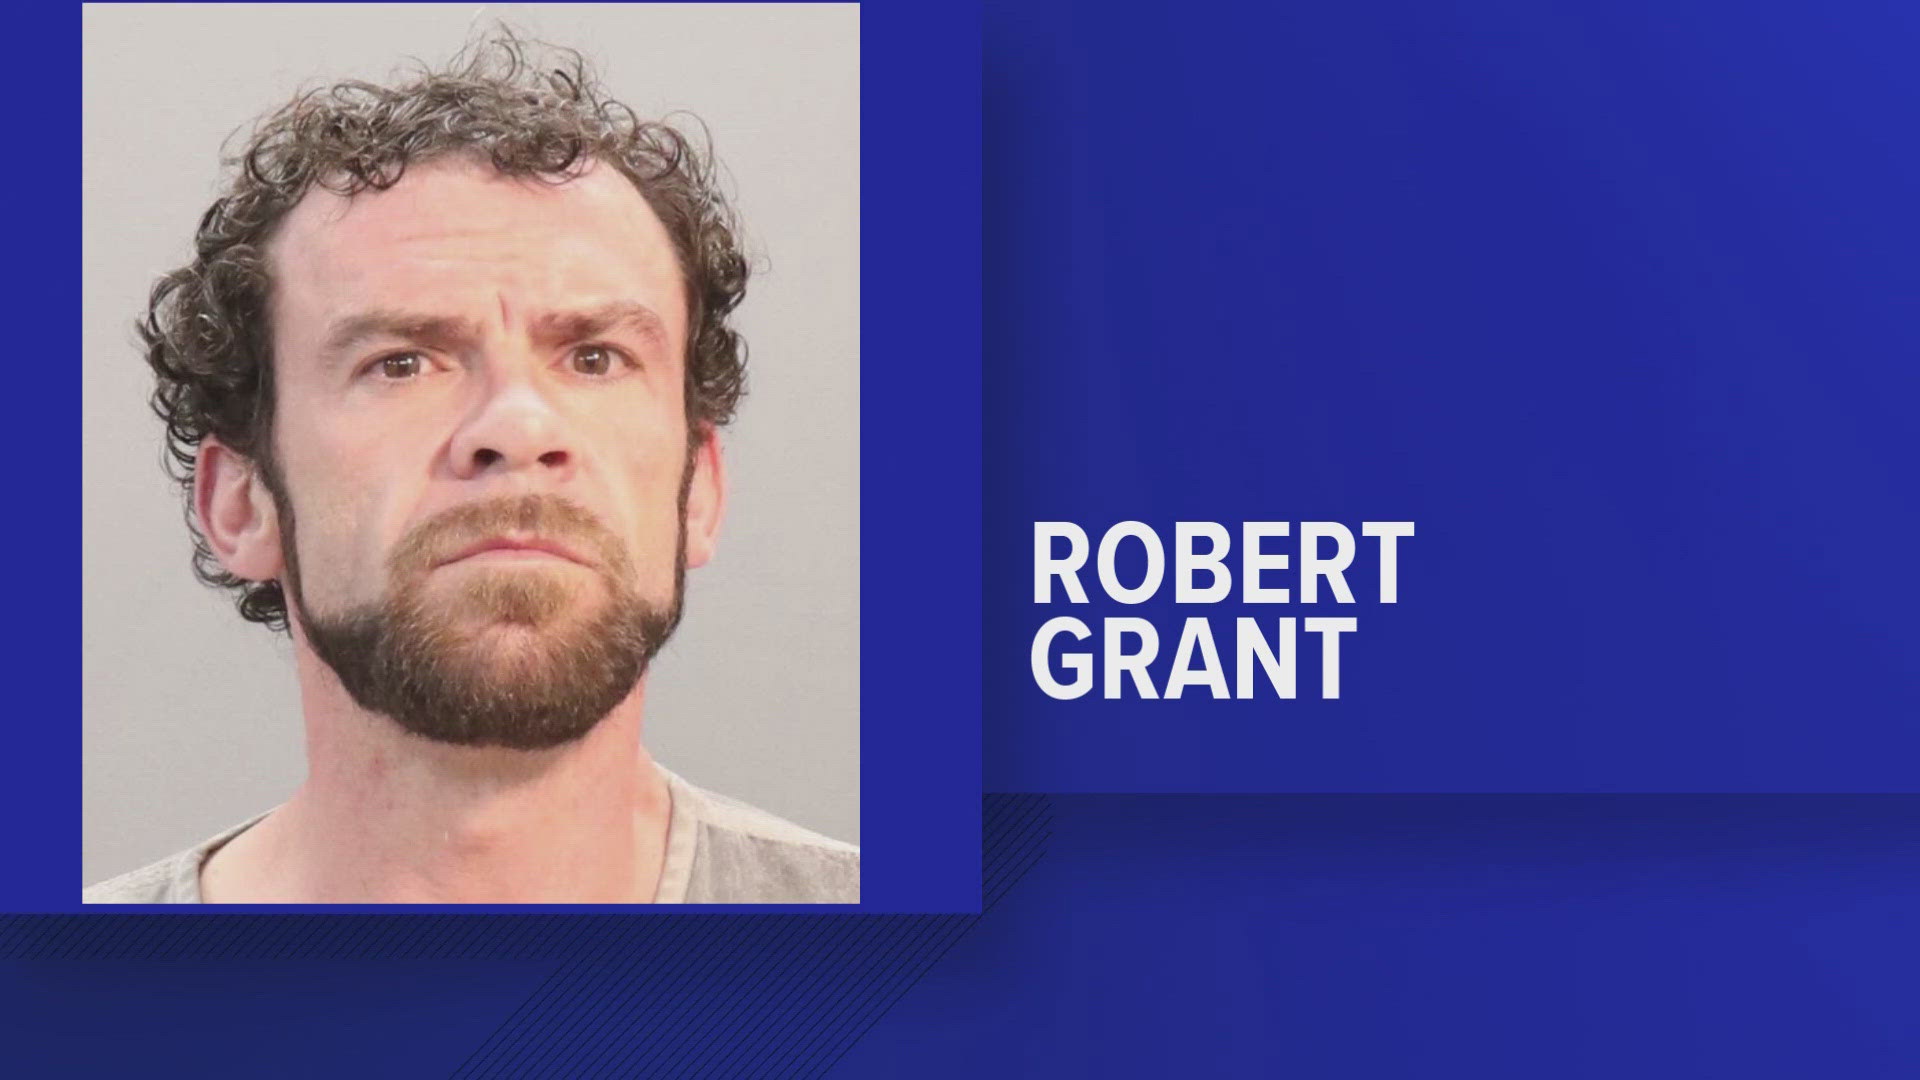 Robert L. Grant, 37, was being held in jail in lieu of bond. He has a criminal record for robbery.